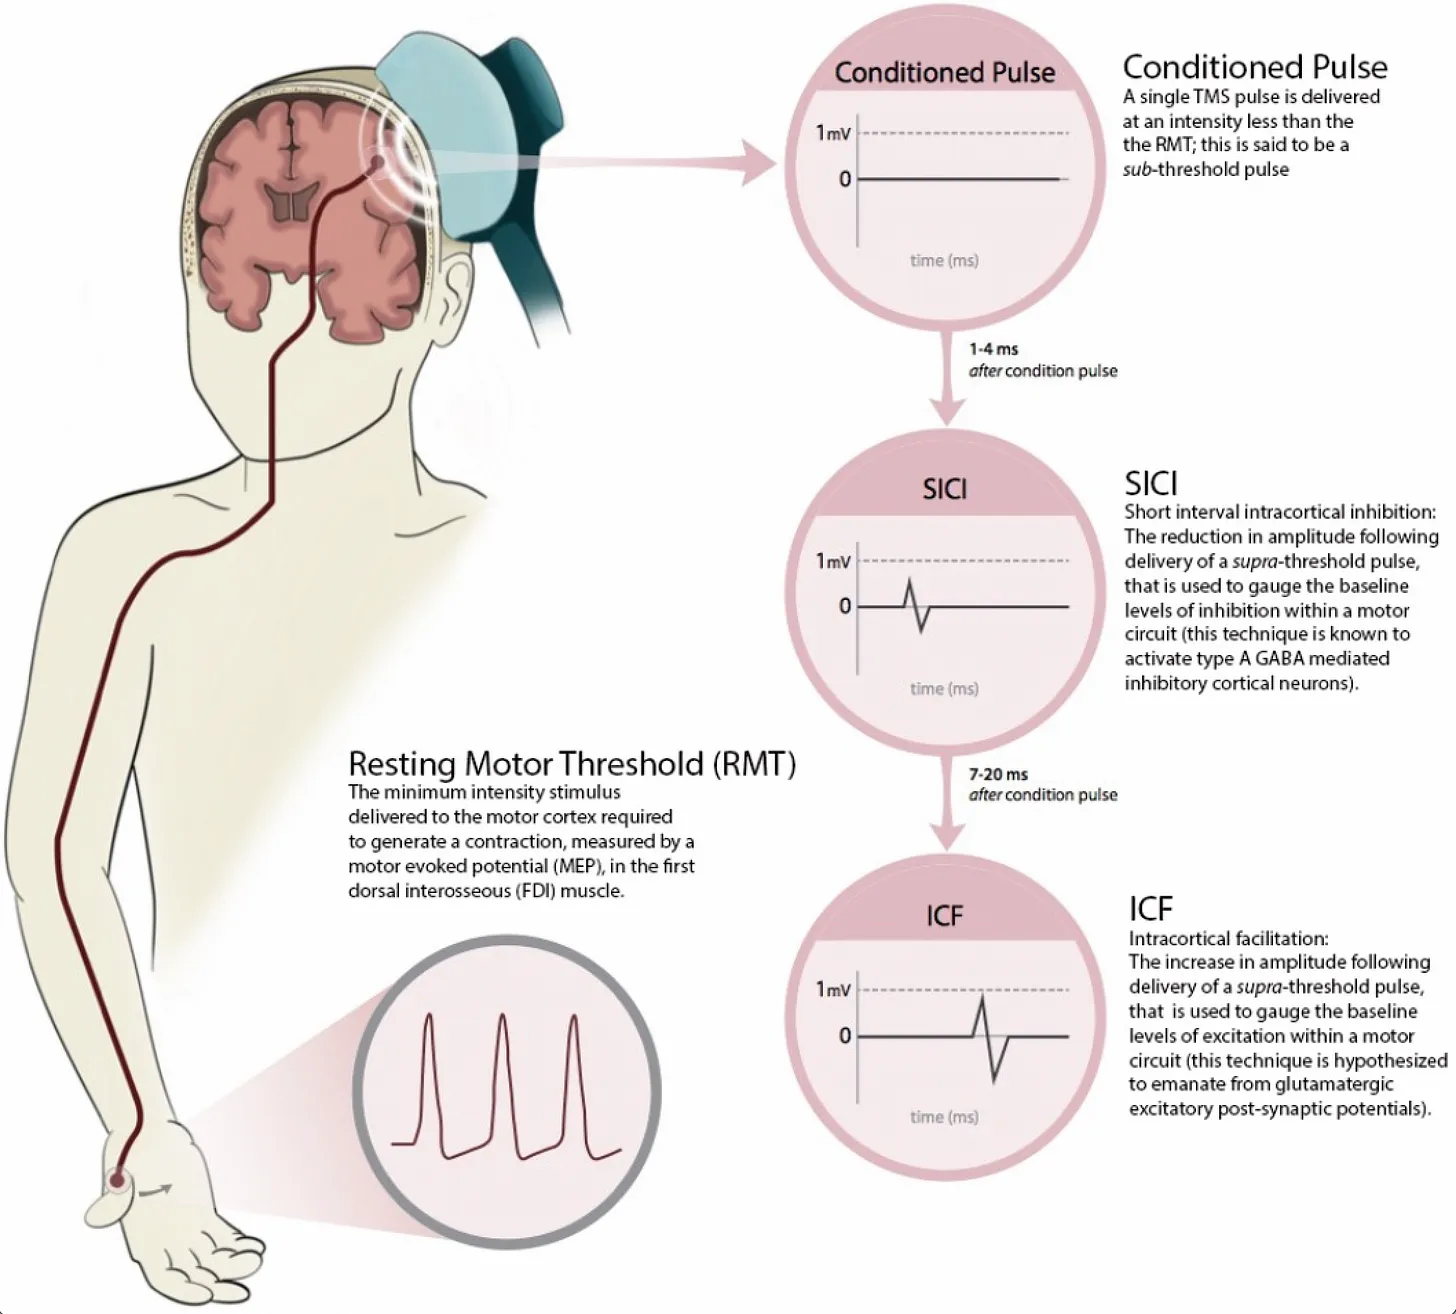 Short interval Intracortical Inhibition (SICI) and Intracortical Facilitation (ICF) are two methods to gauge the Nervous System's state of excitability. Other probes like Cortical Silent Period (CSP) and Long Interval Intracortical Inhibition (LICI) are also valuable.